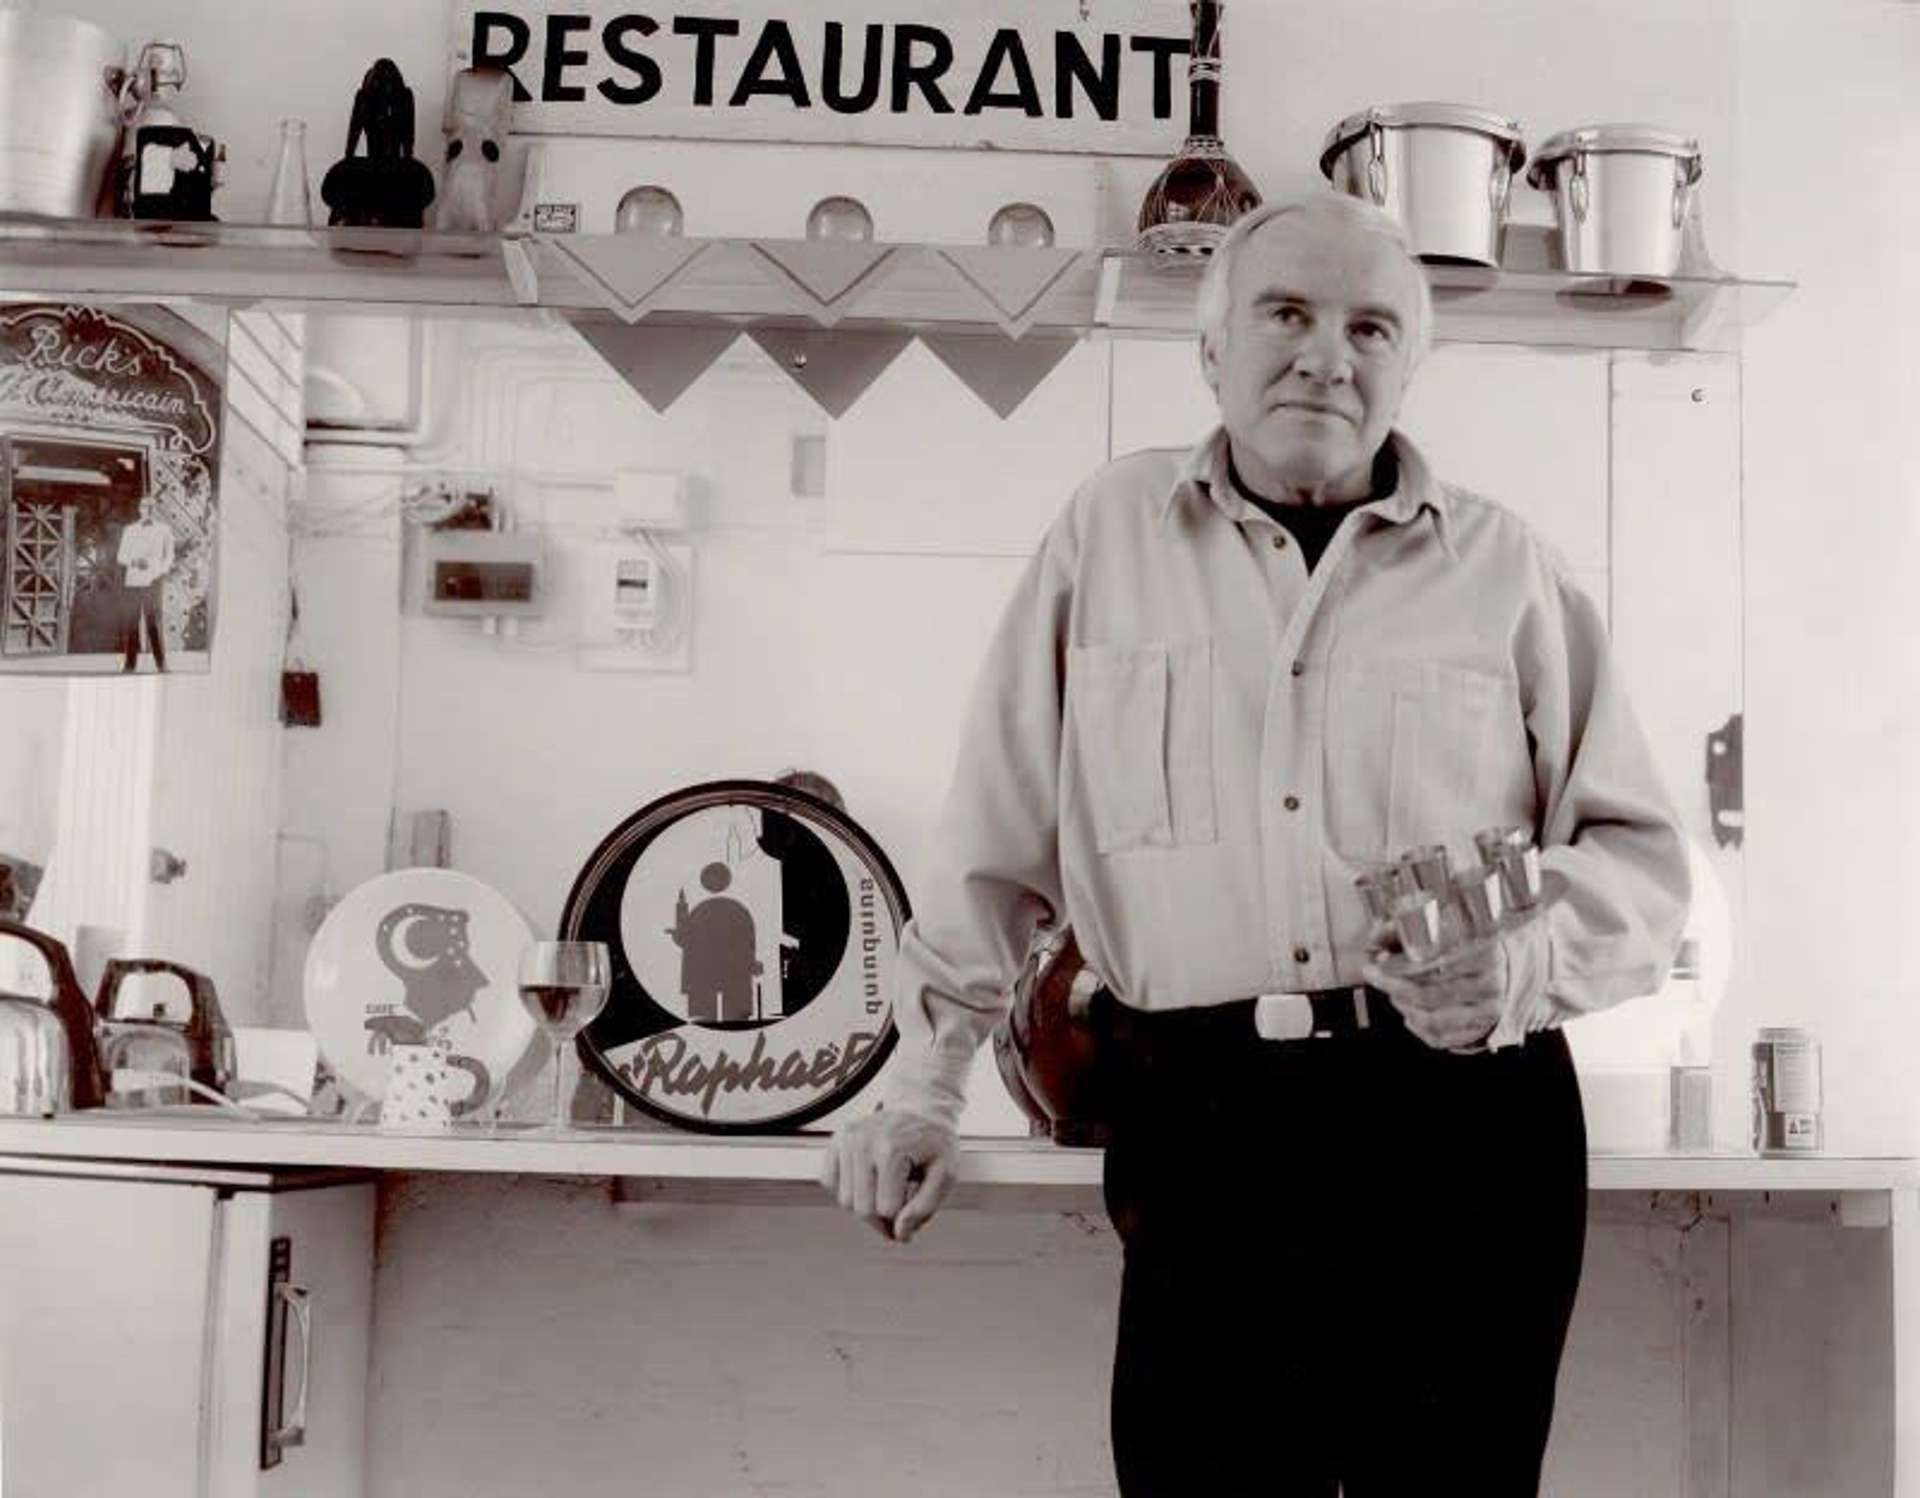 A black and white image of the artist Patrick Caulfield, standing in front of a kitchen.